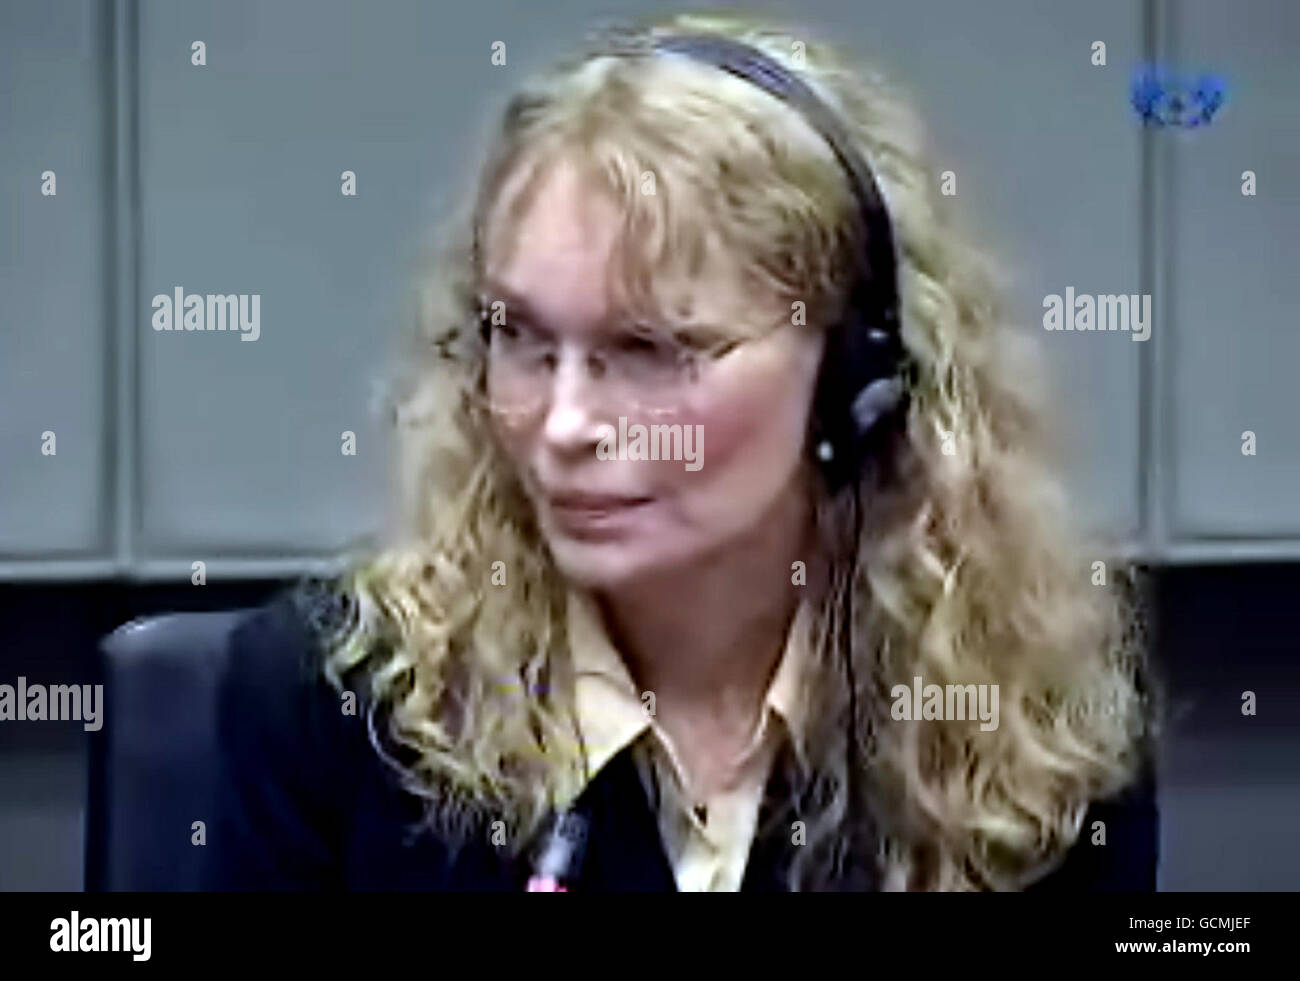 Video grab taken of actress Mia Farrow giving evidence to the war crimes trial of former Liberian leader Charles Taylor at the Special Court for Sierra Leone in The Hague. Stock Photo